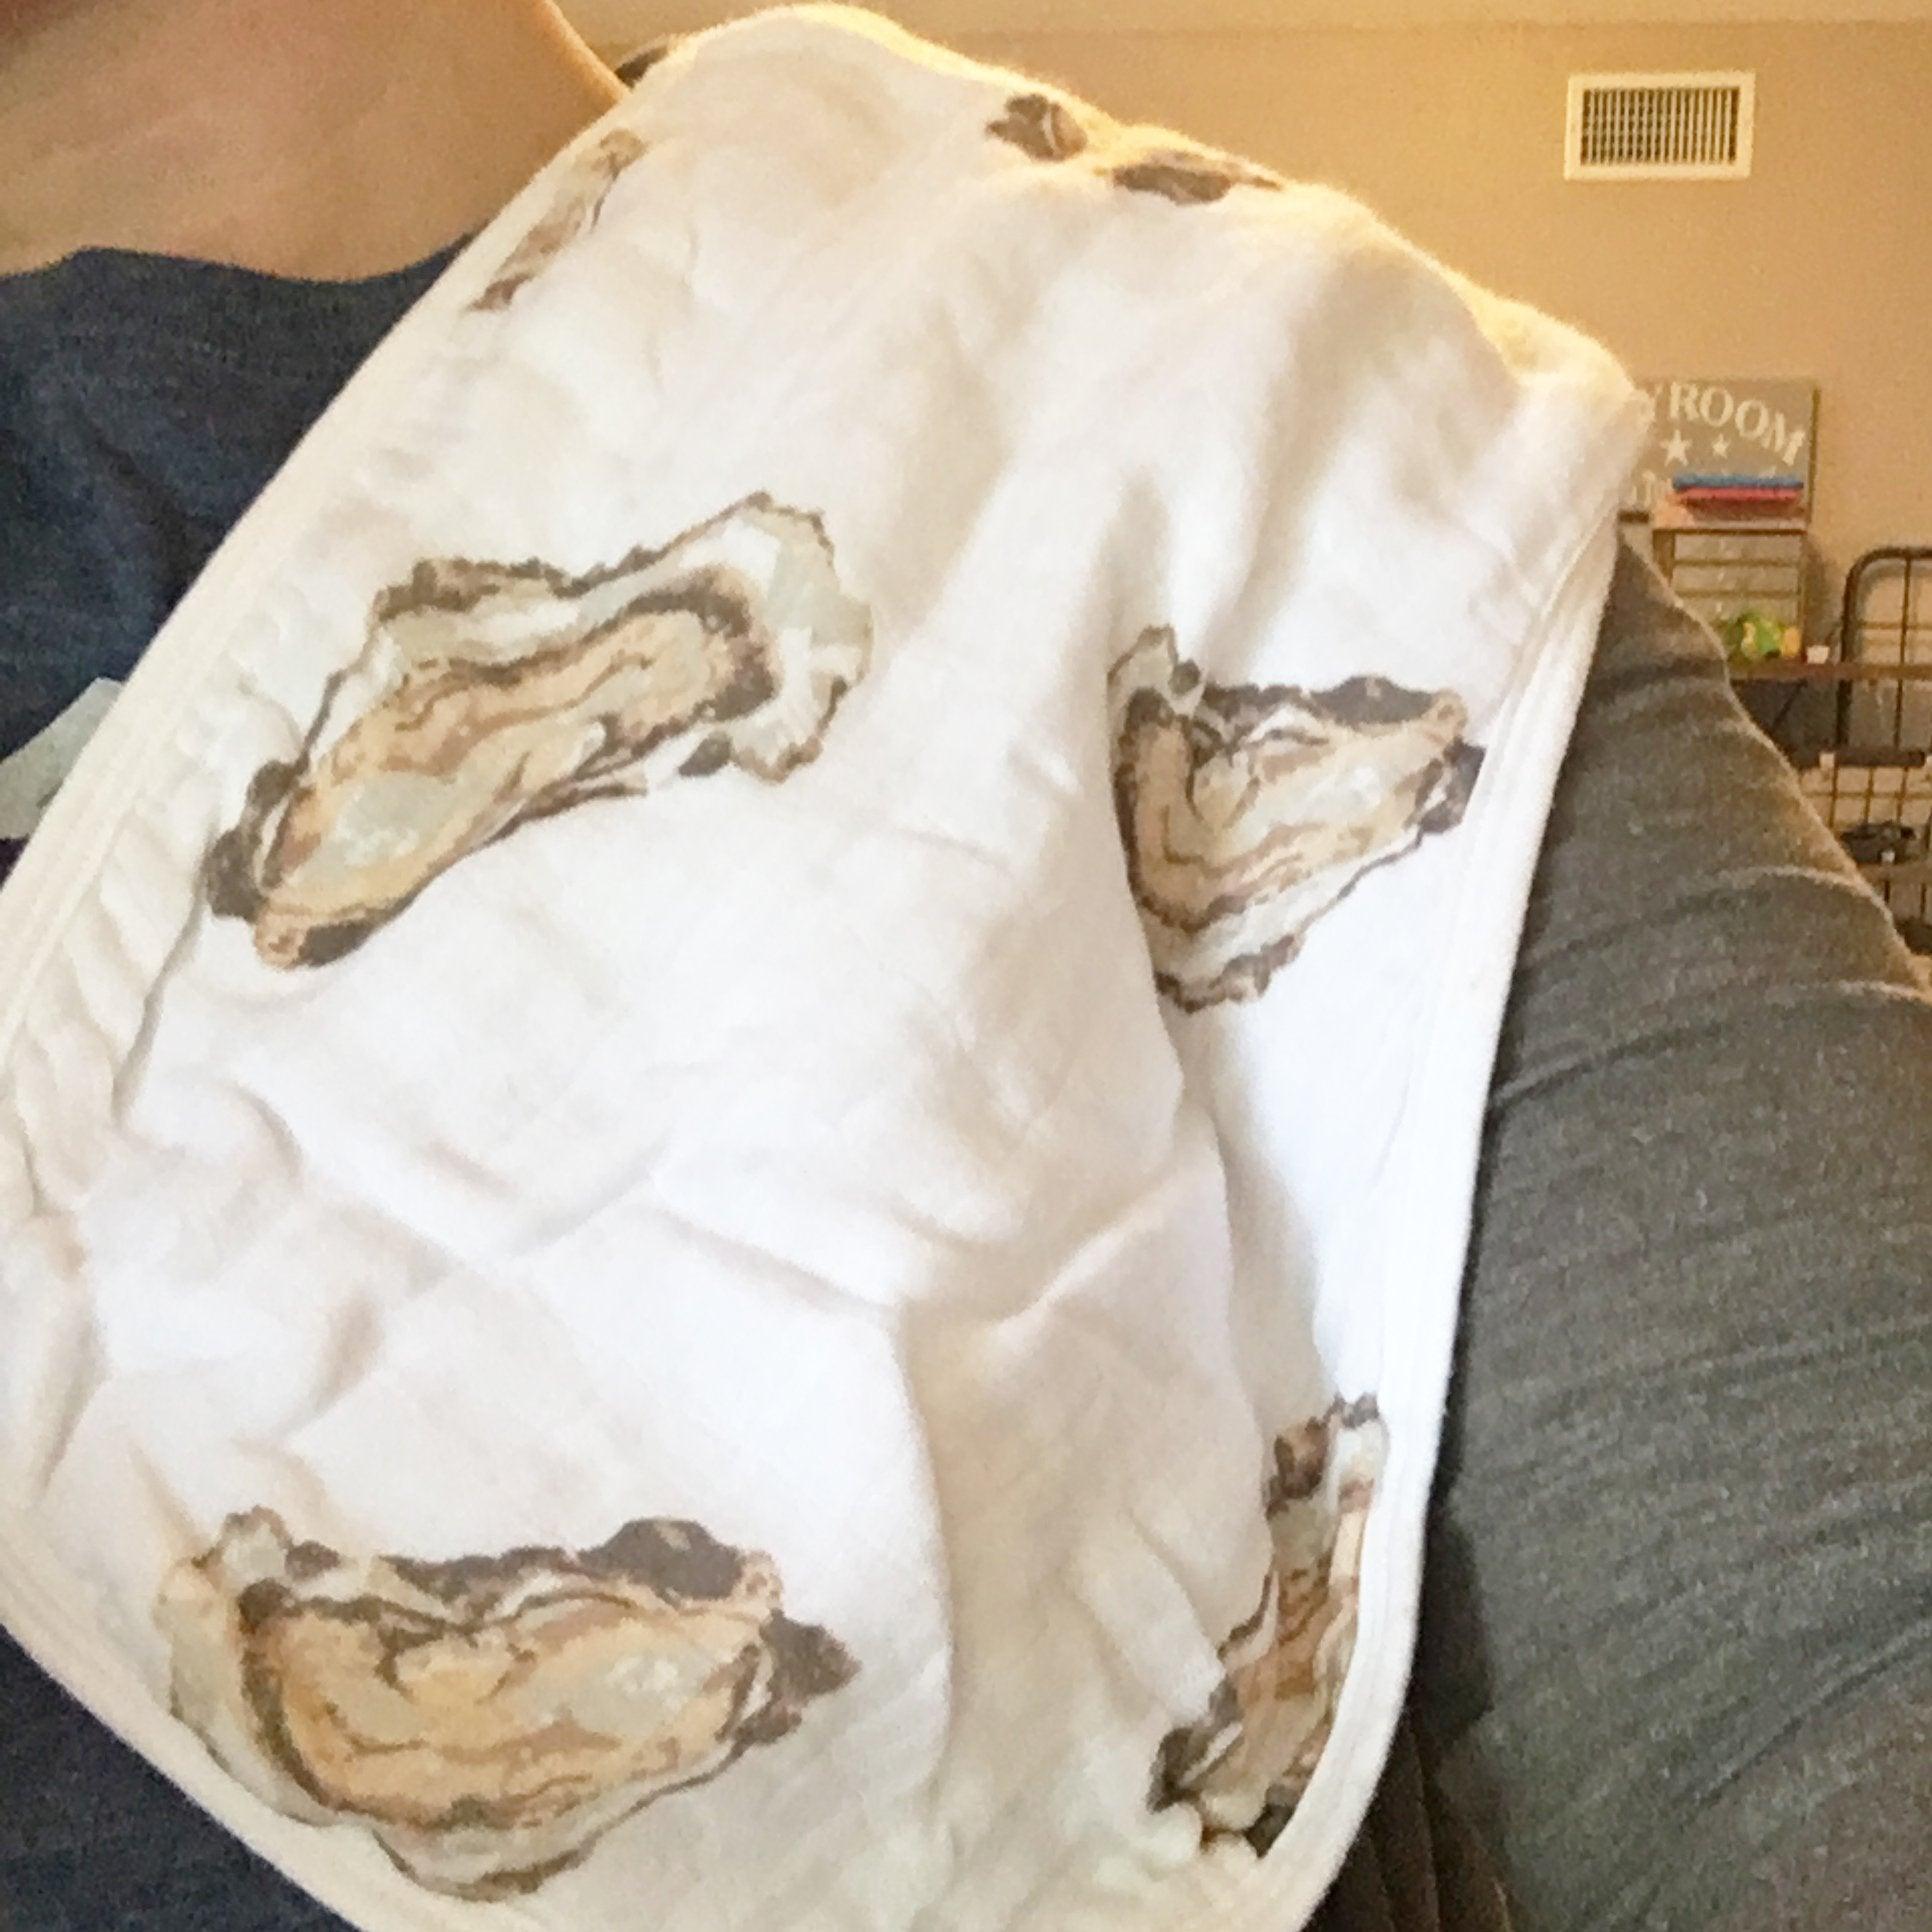 Baby bib and burp cloth set with cute oyster design and "Aw Shucks" text on a white background.